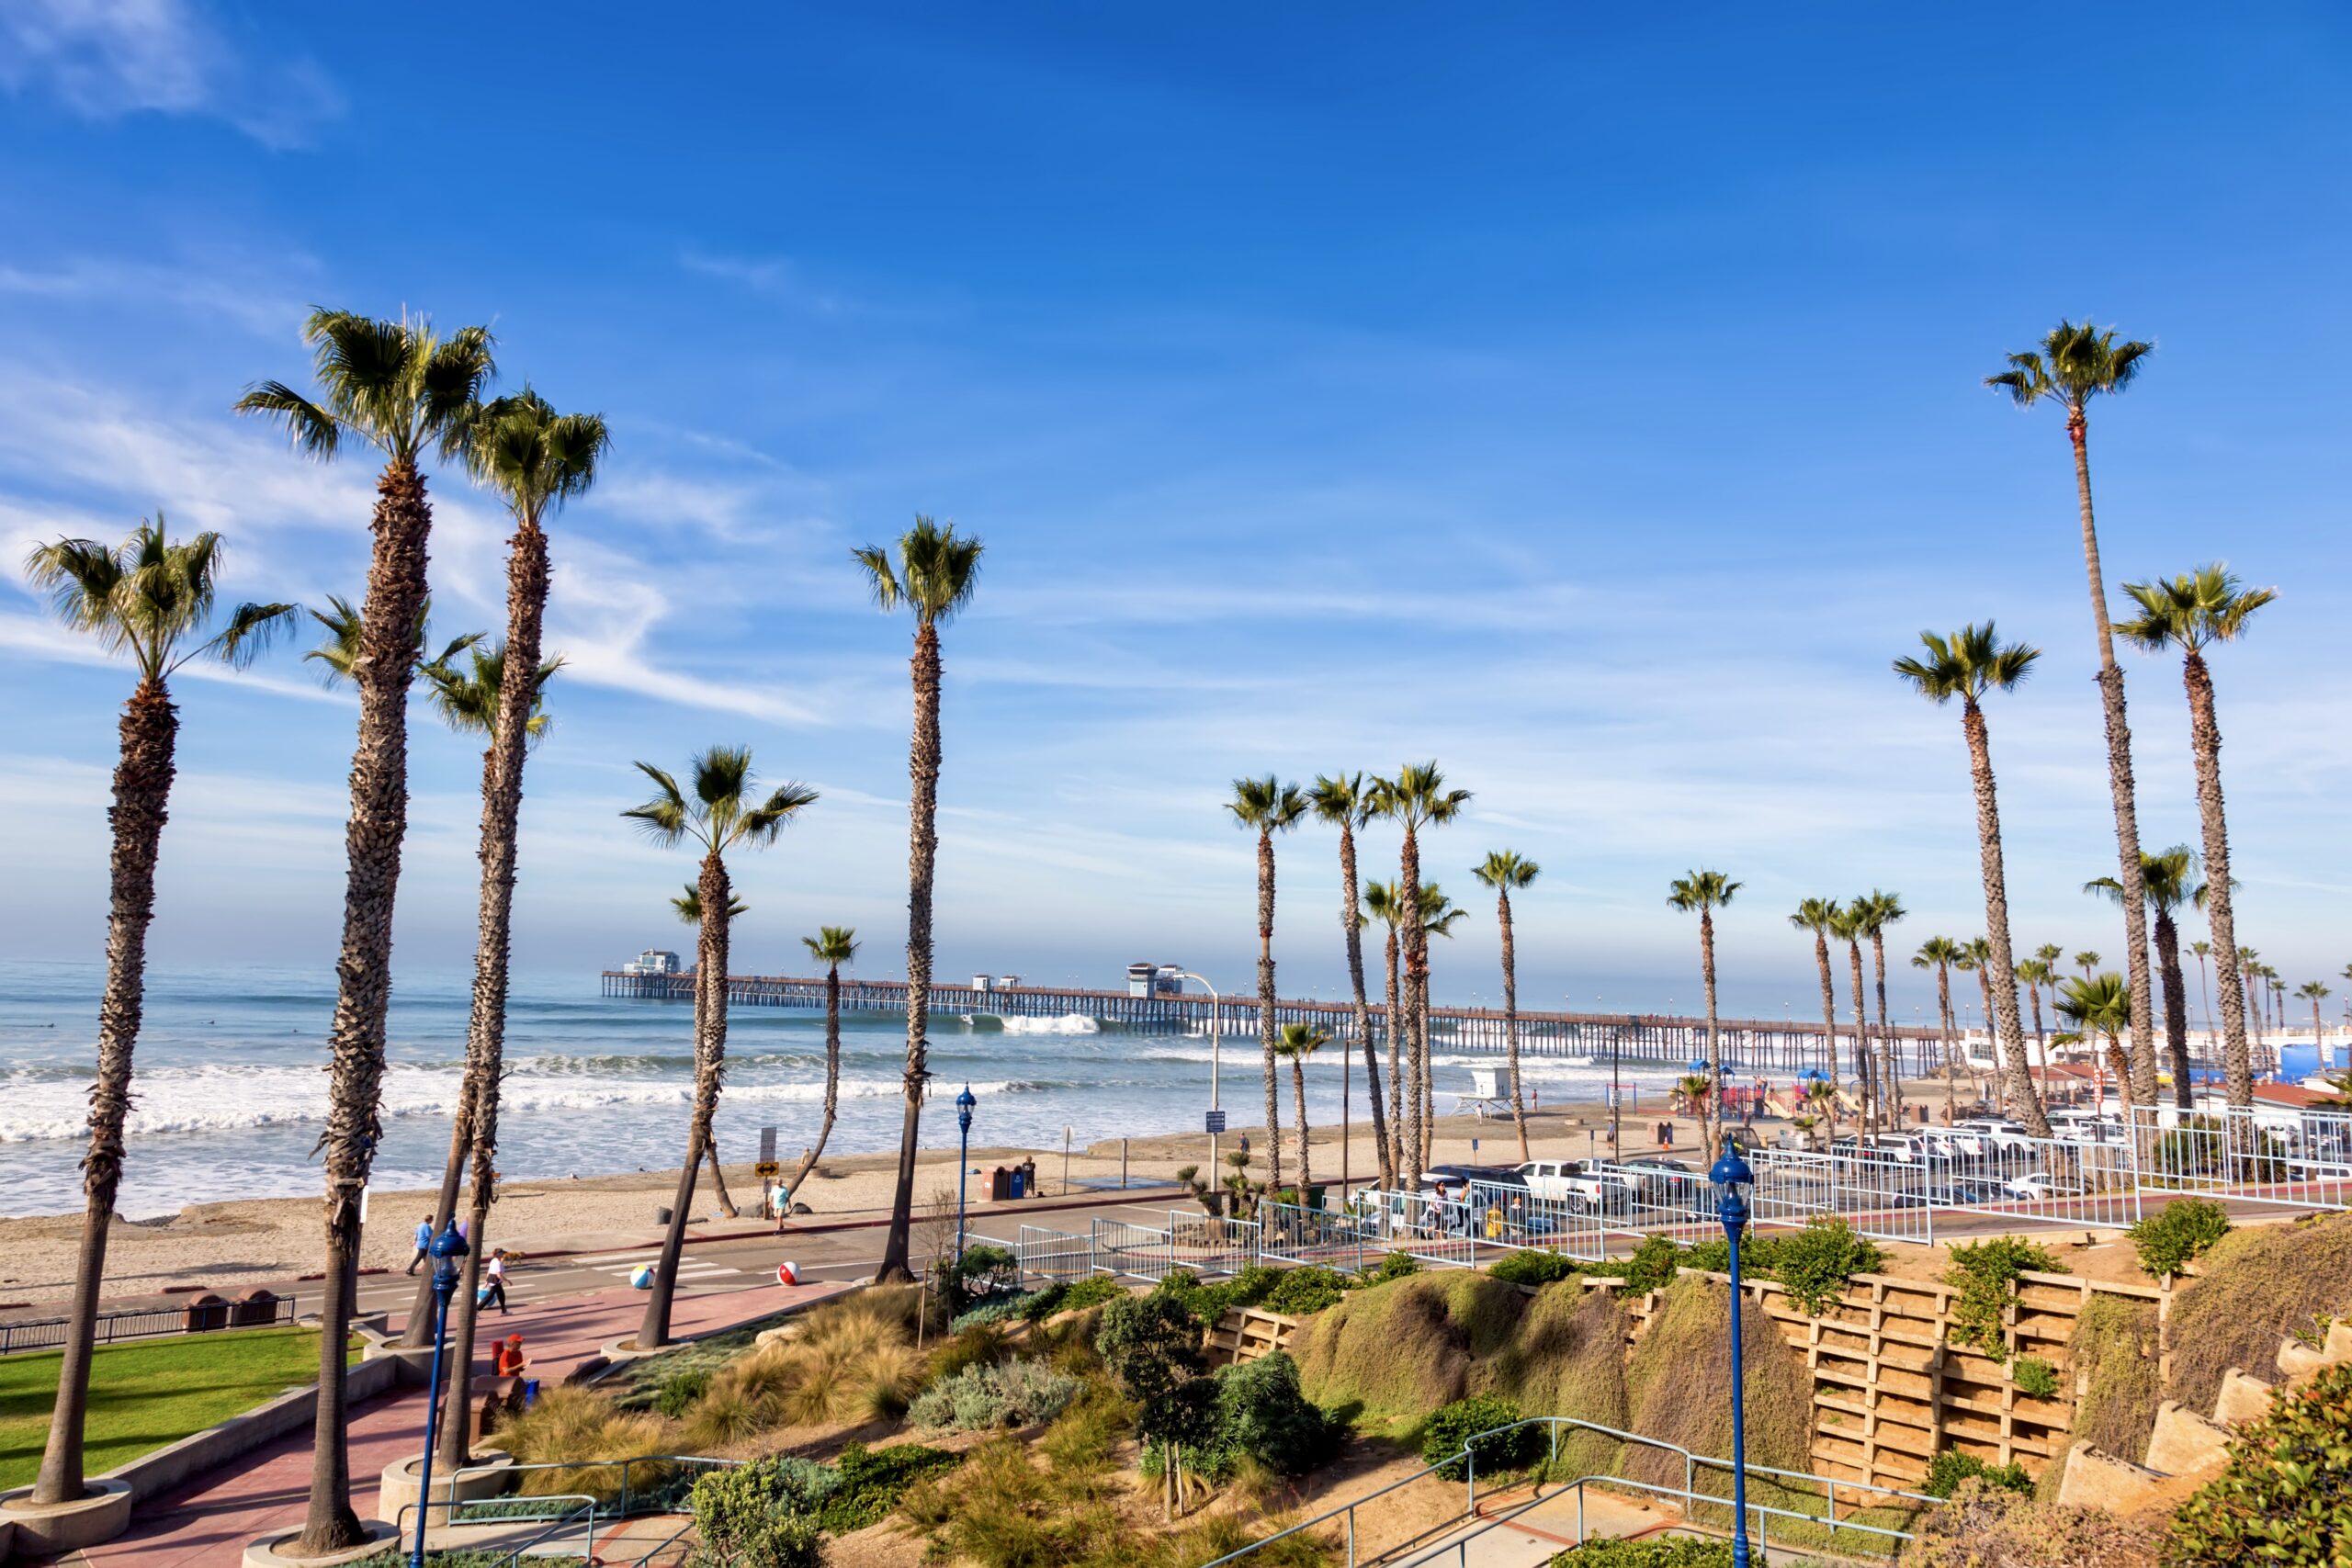 Why You Should Visit Oceanside, California - PureWow